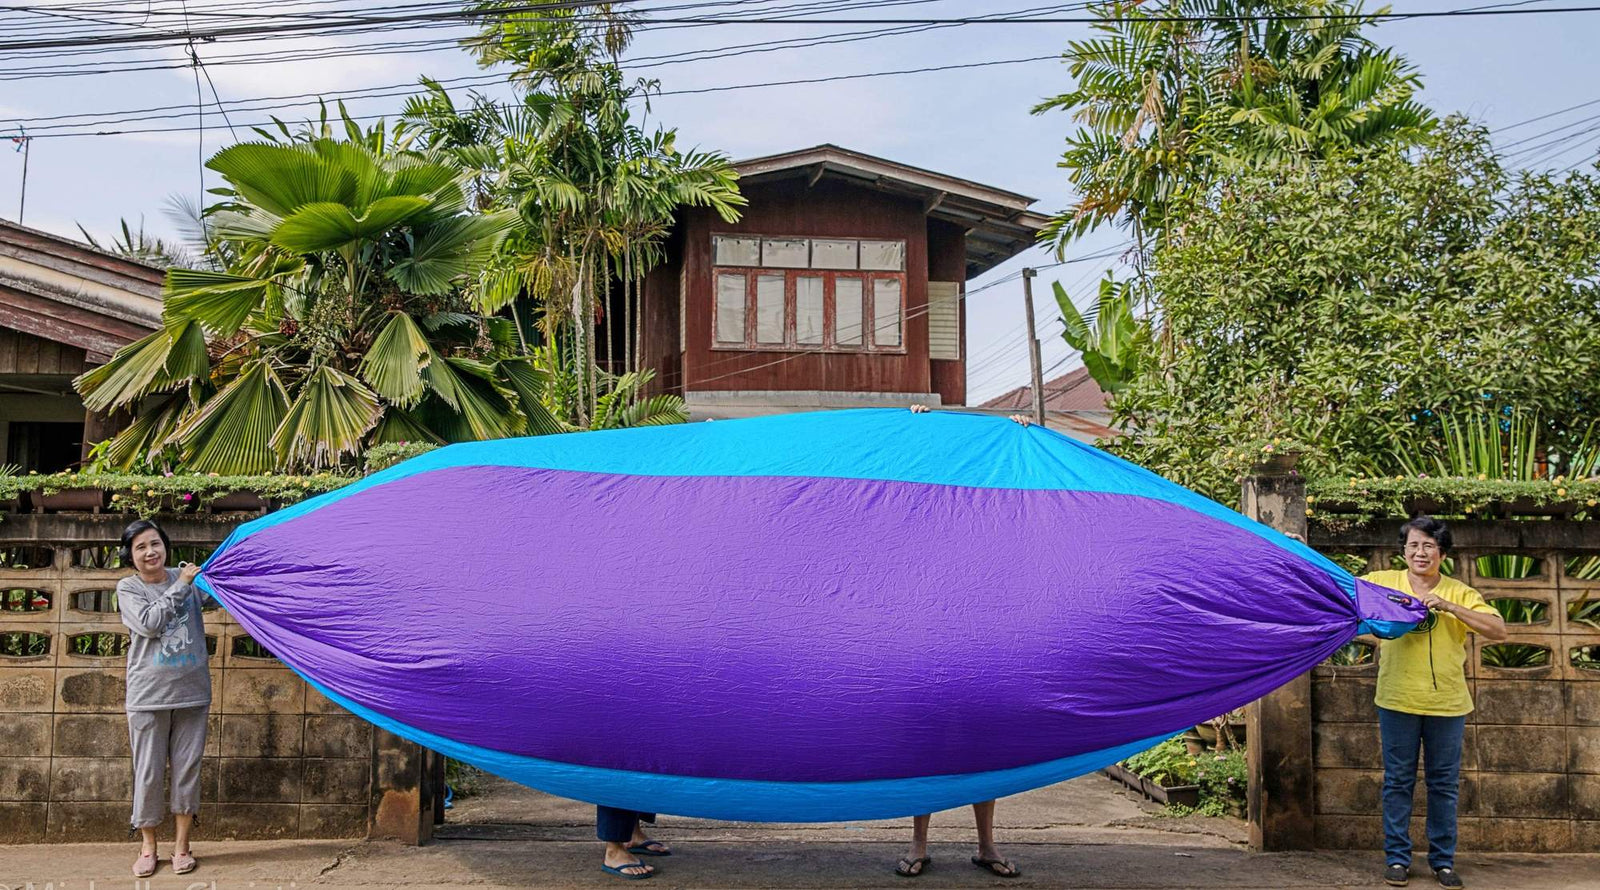 https://www.flyingsquirreloutfitters.com/cdn/shop/articles/flying-squirrel-outfitters-hammock-basecamp-hammock-purple-aqua-2010684227625_2000x_5e8bb51c-47fa-4146-a073-4d6934d8e125_1600x.jpg?v=1626610363